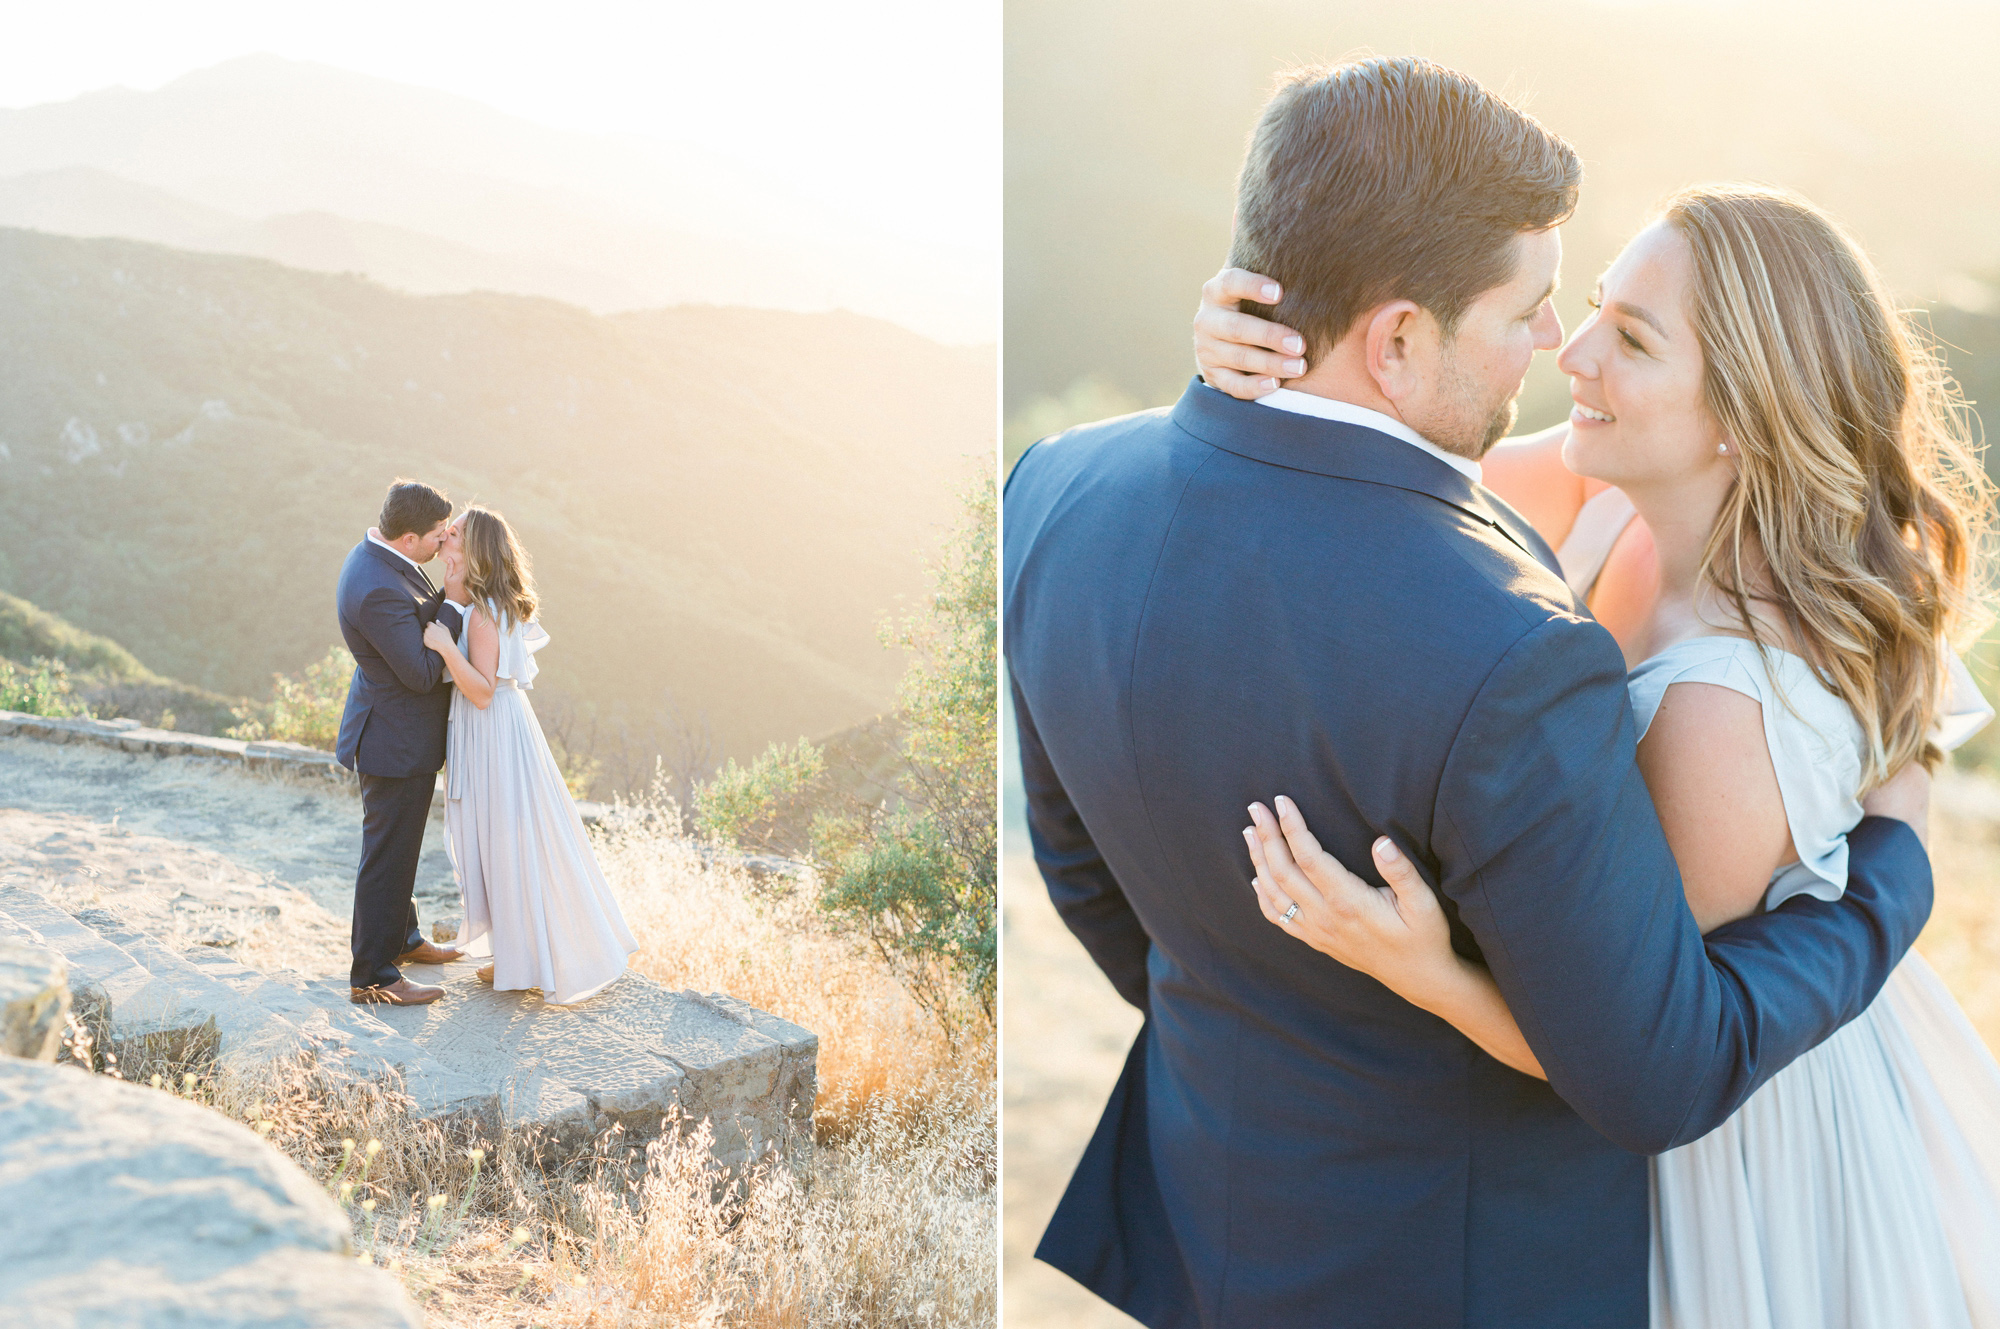 The most beautiful golden hour at Cori and Drew's anniversary session.